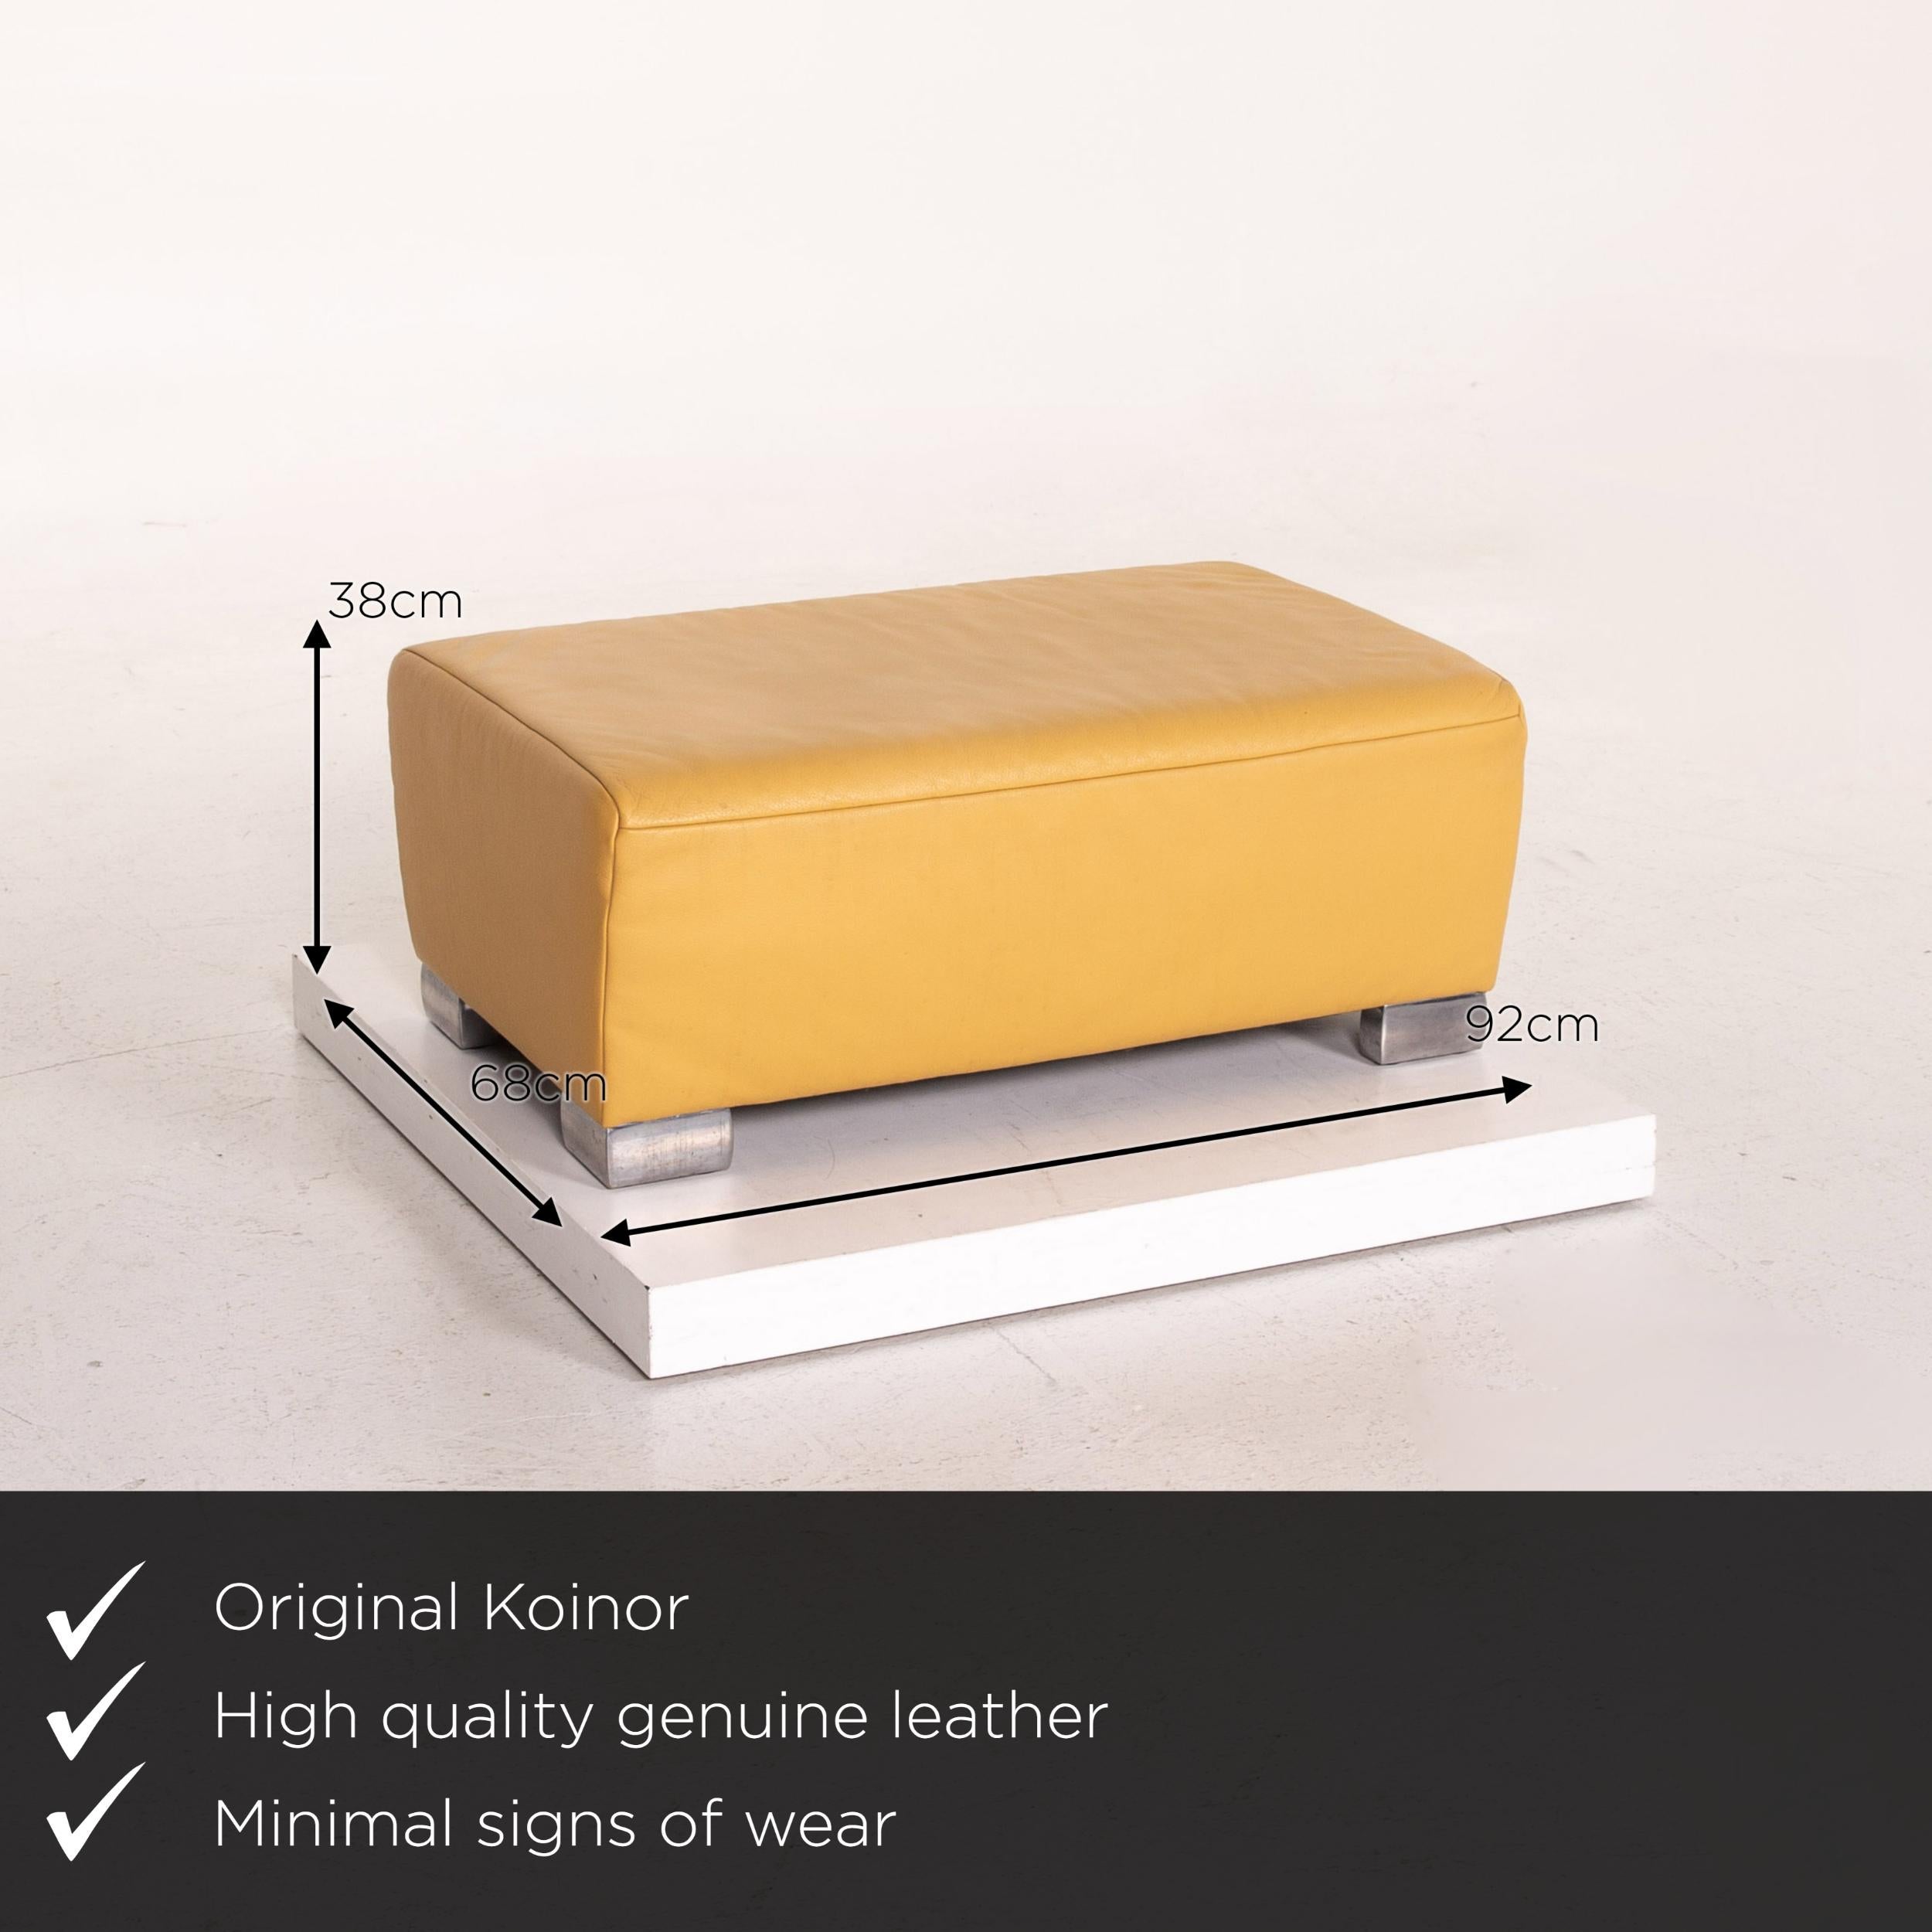 We present to you a Koinor Volare leather stool yellow ottoman.
   
 

 Product measurements in centimeters:
 

 Depth 68
 Width 92
 Height 38.




   